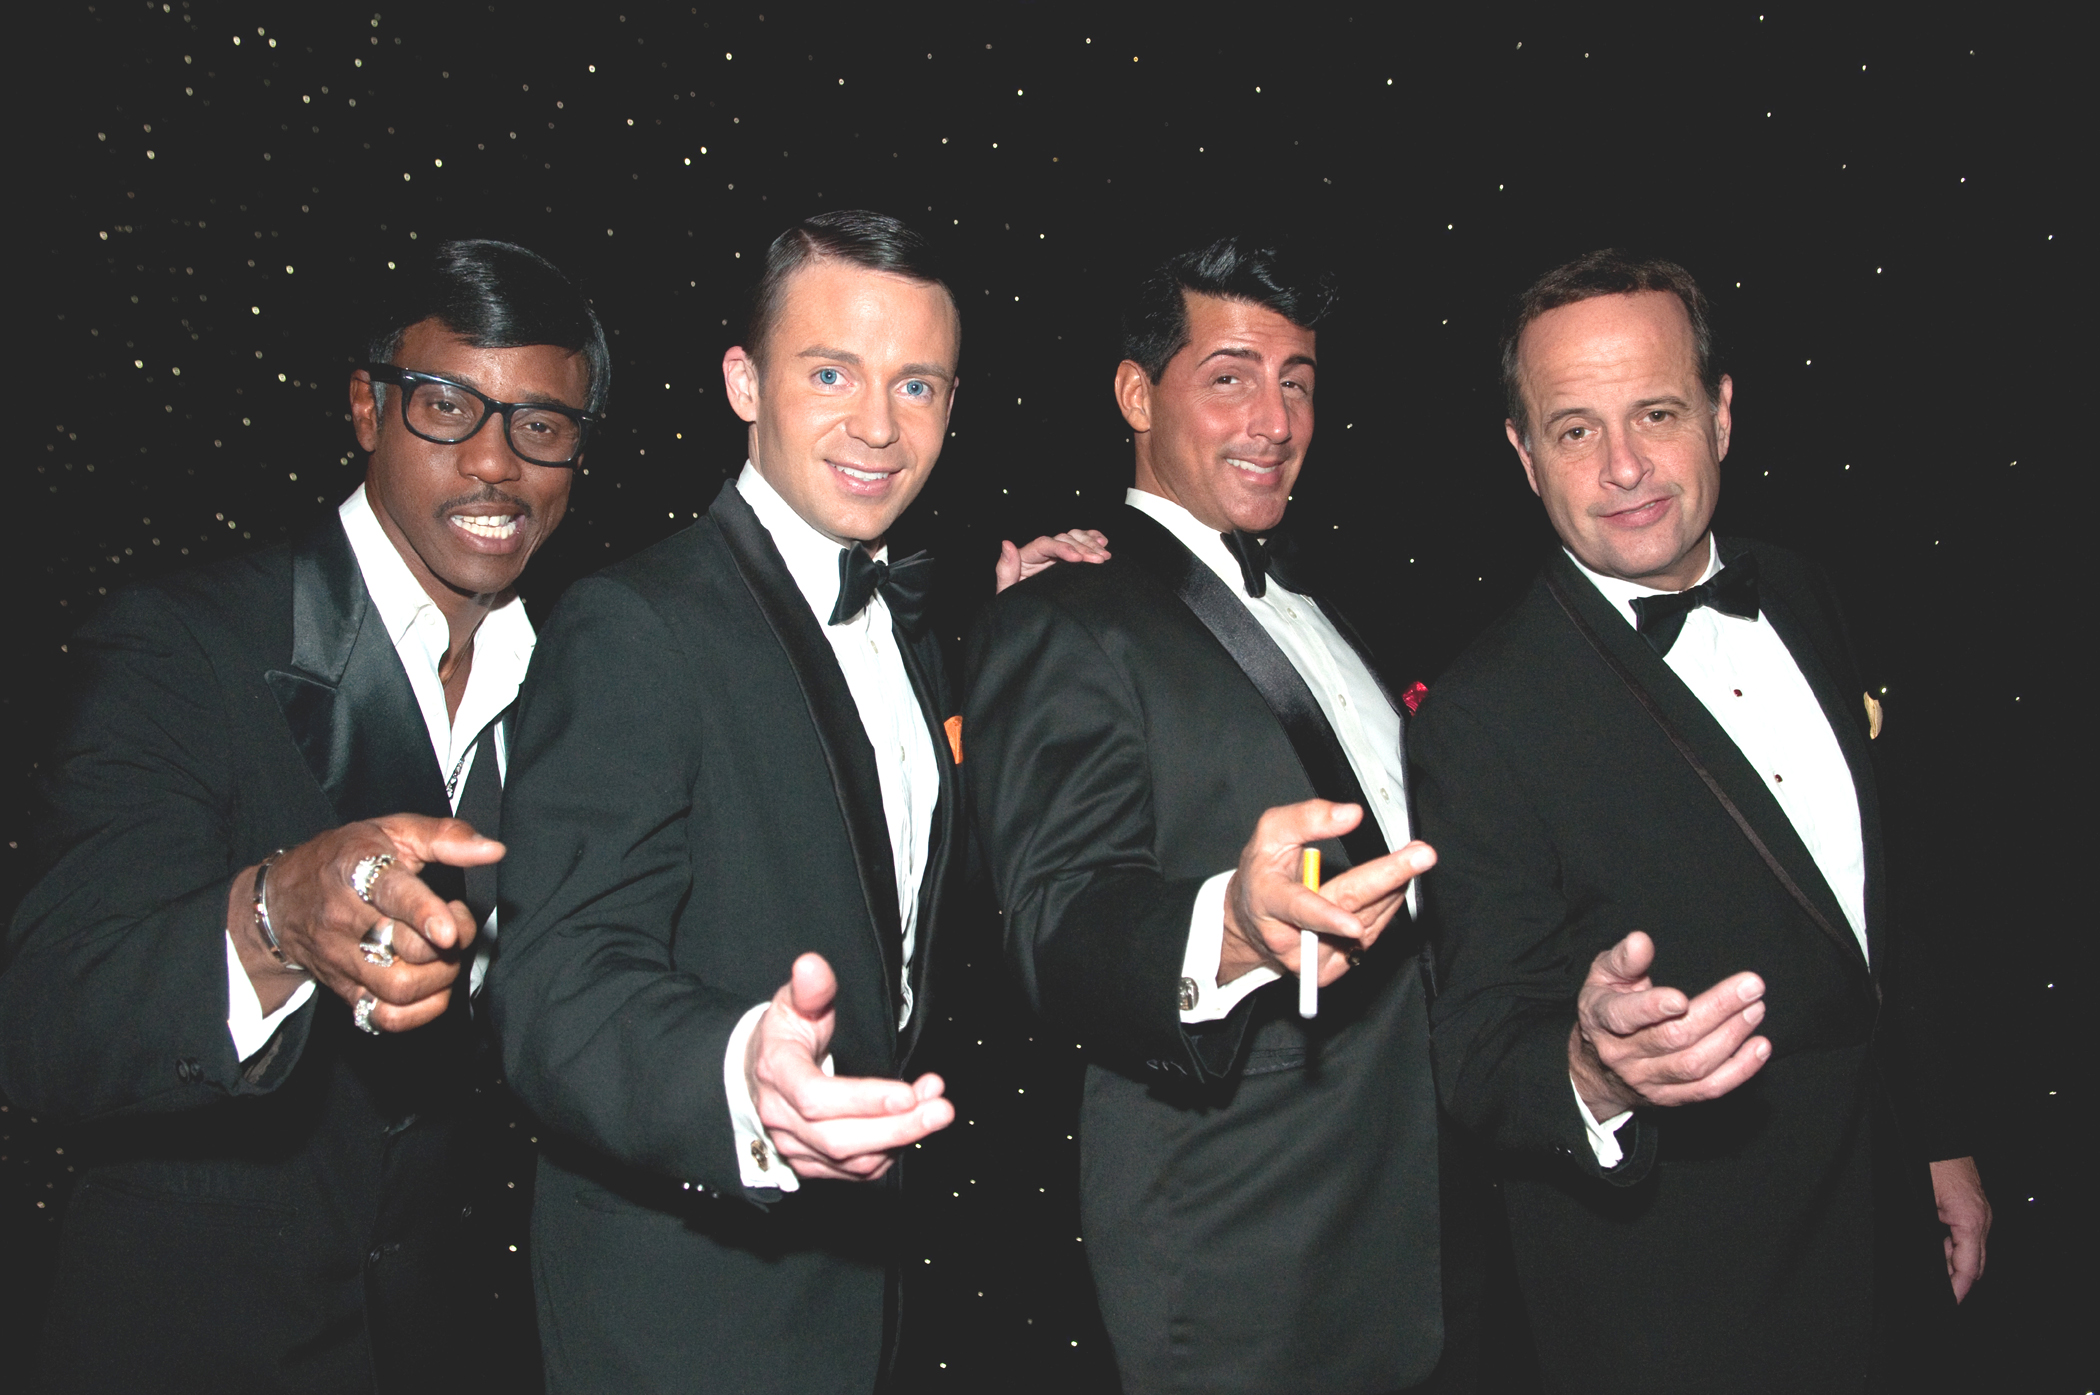 12/15/13 – The Rat Pack is Back For the Holidays!